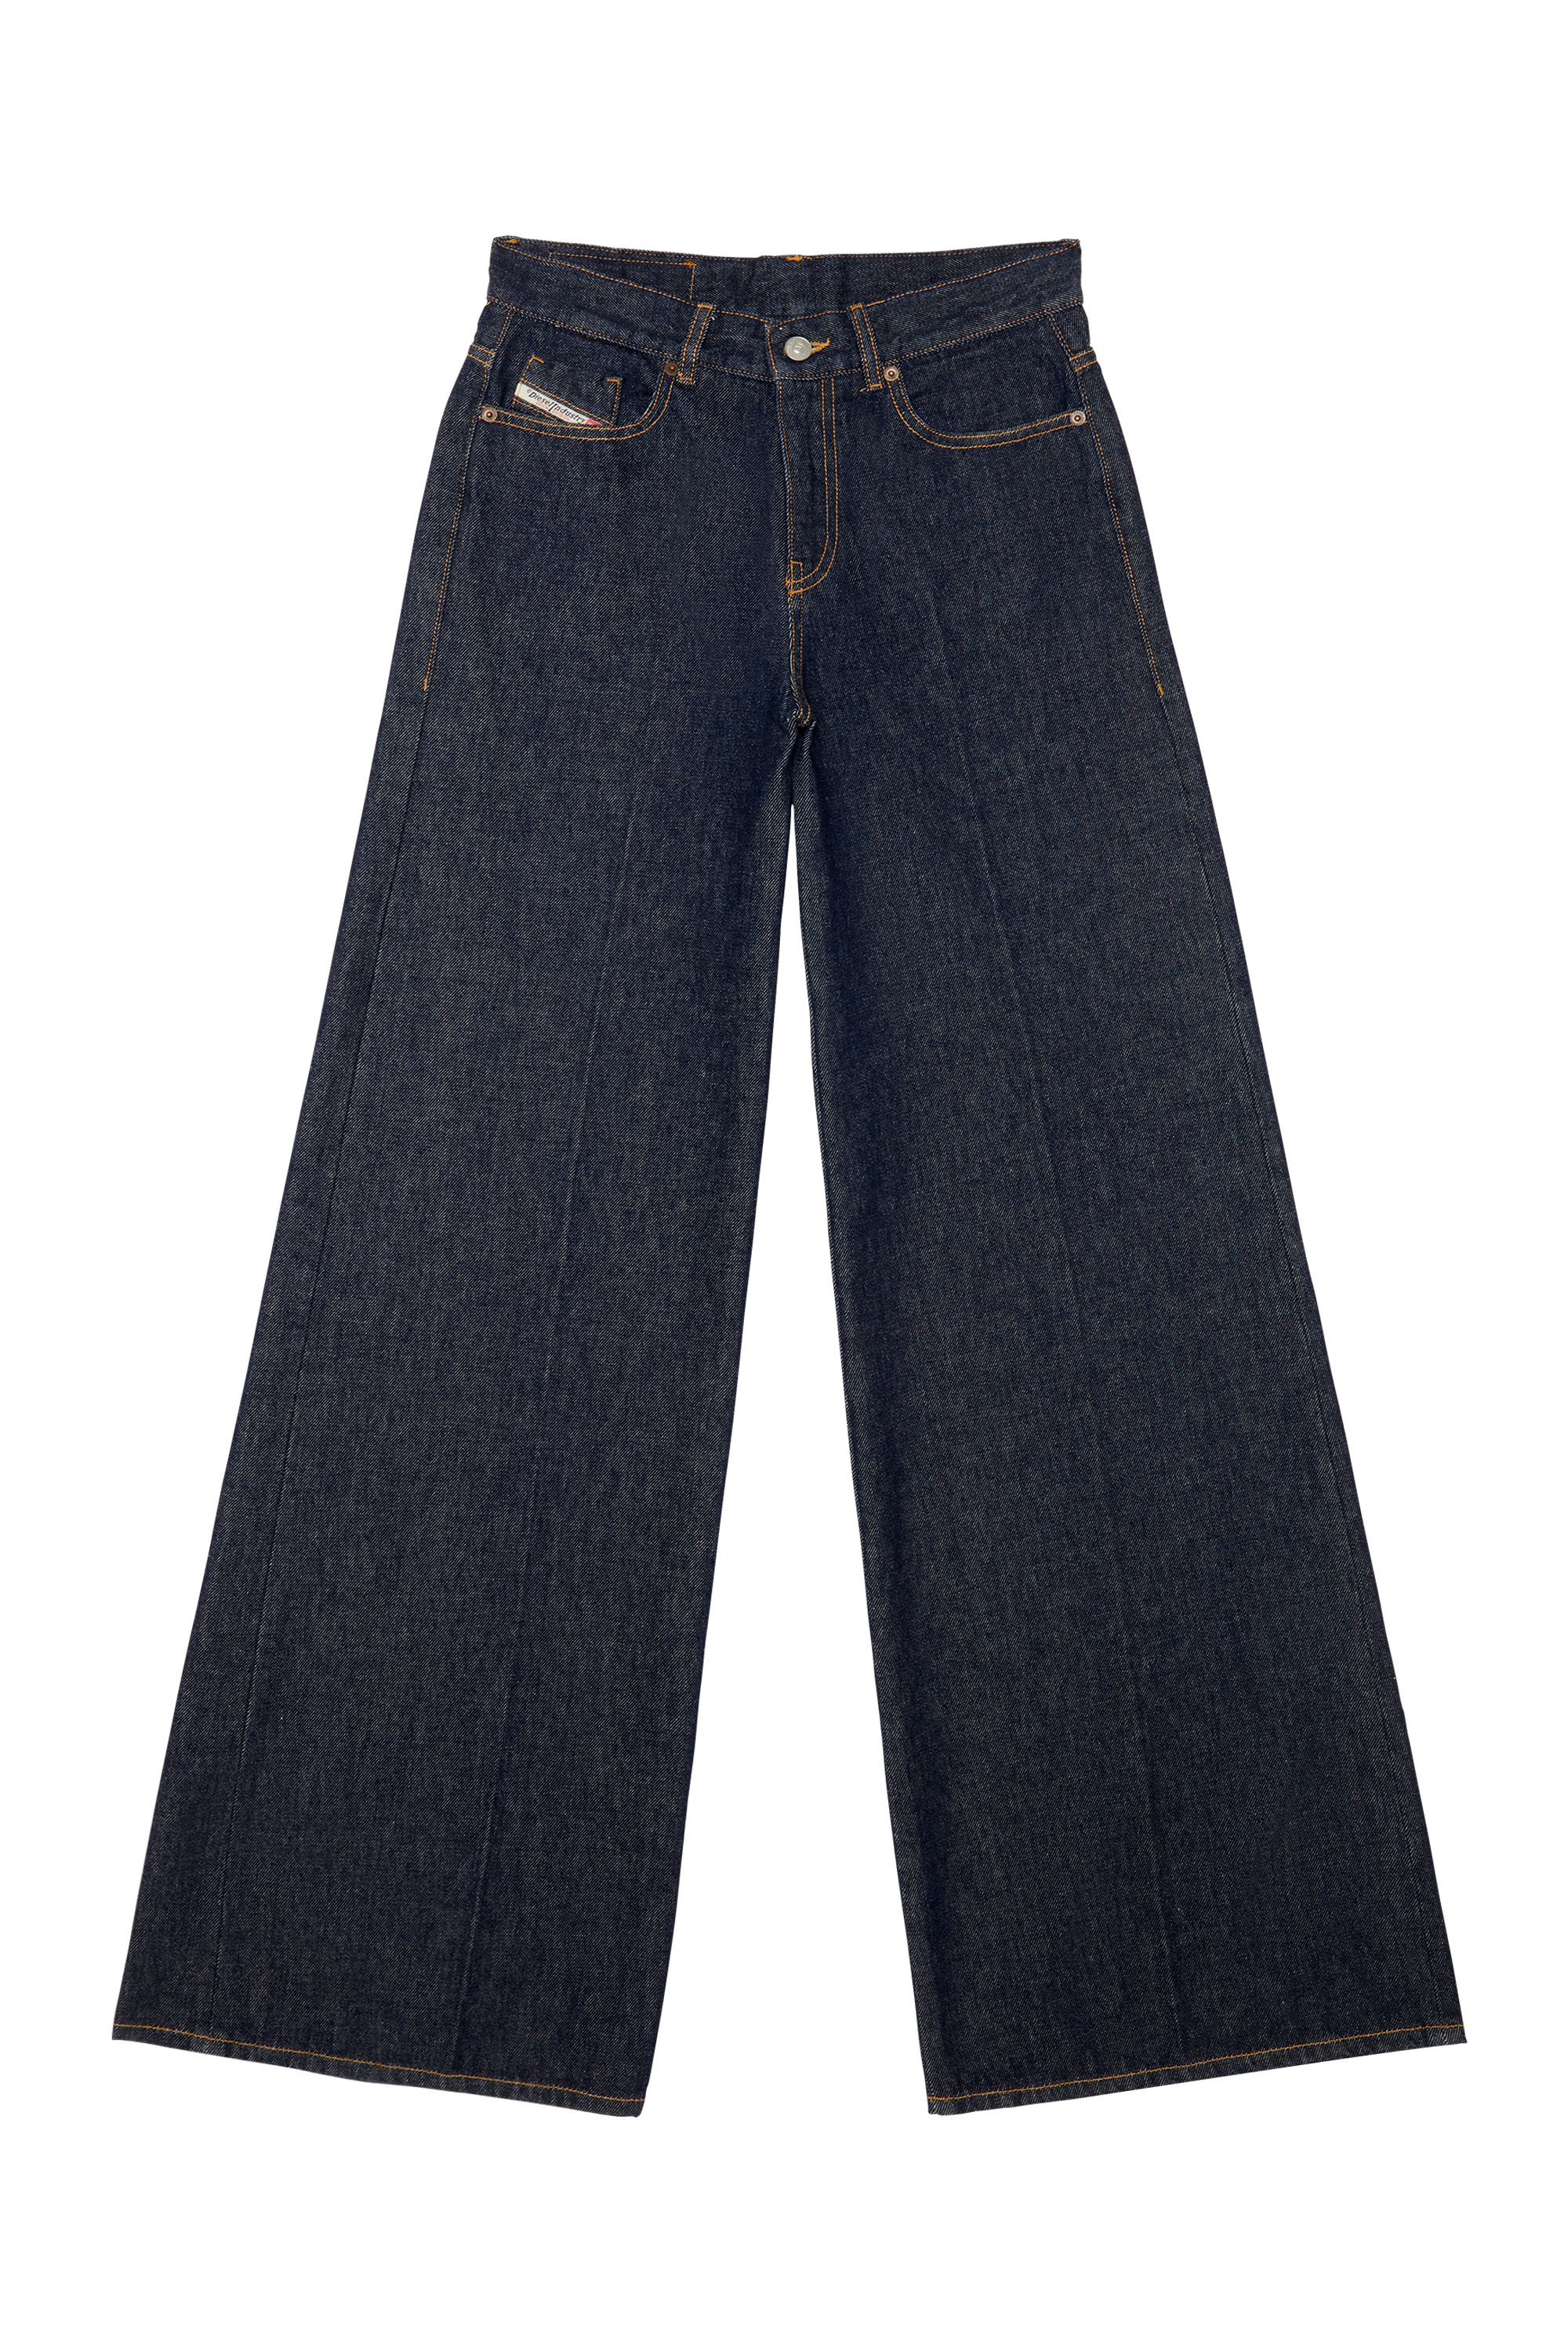 1978 Z9C02 Bootcut and Flare Jeans, Azul Oscuro - Vaqueros